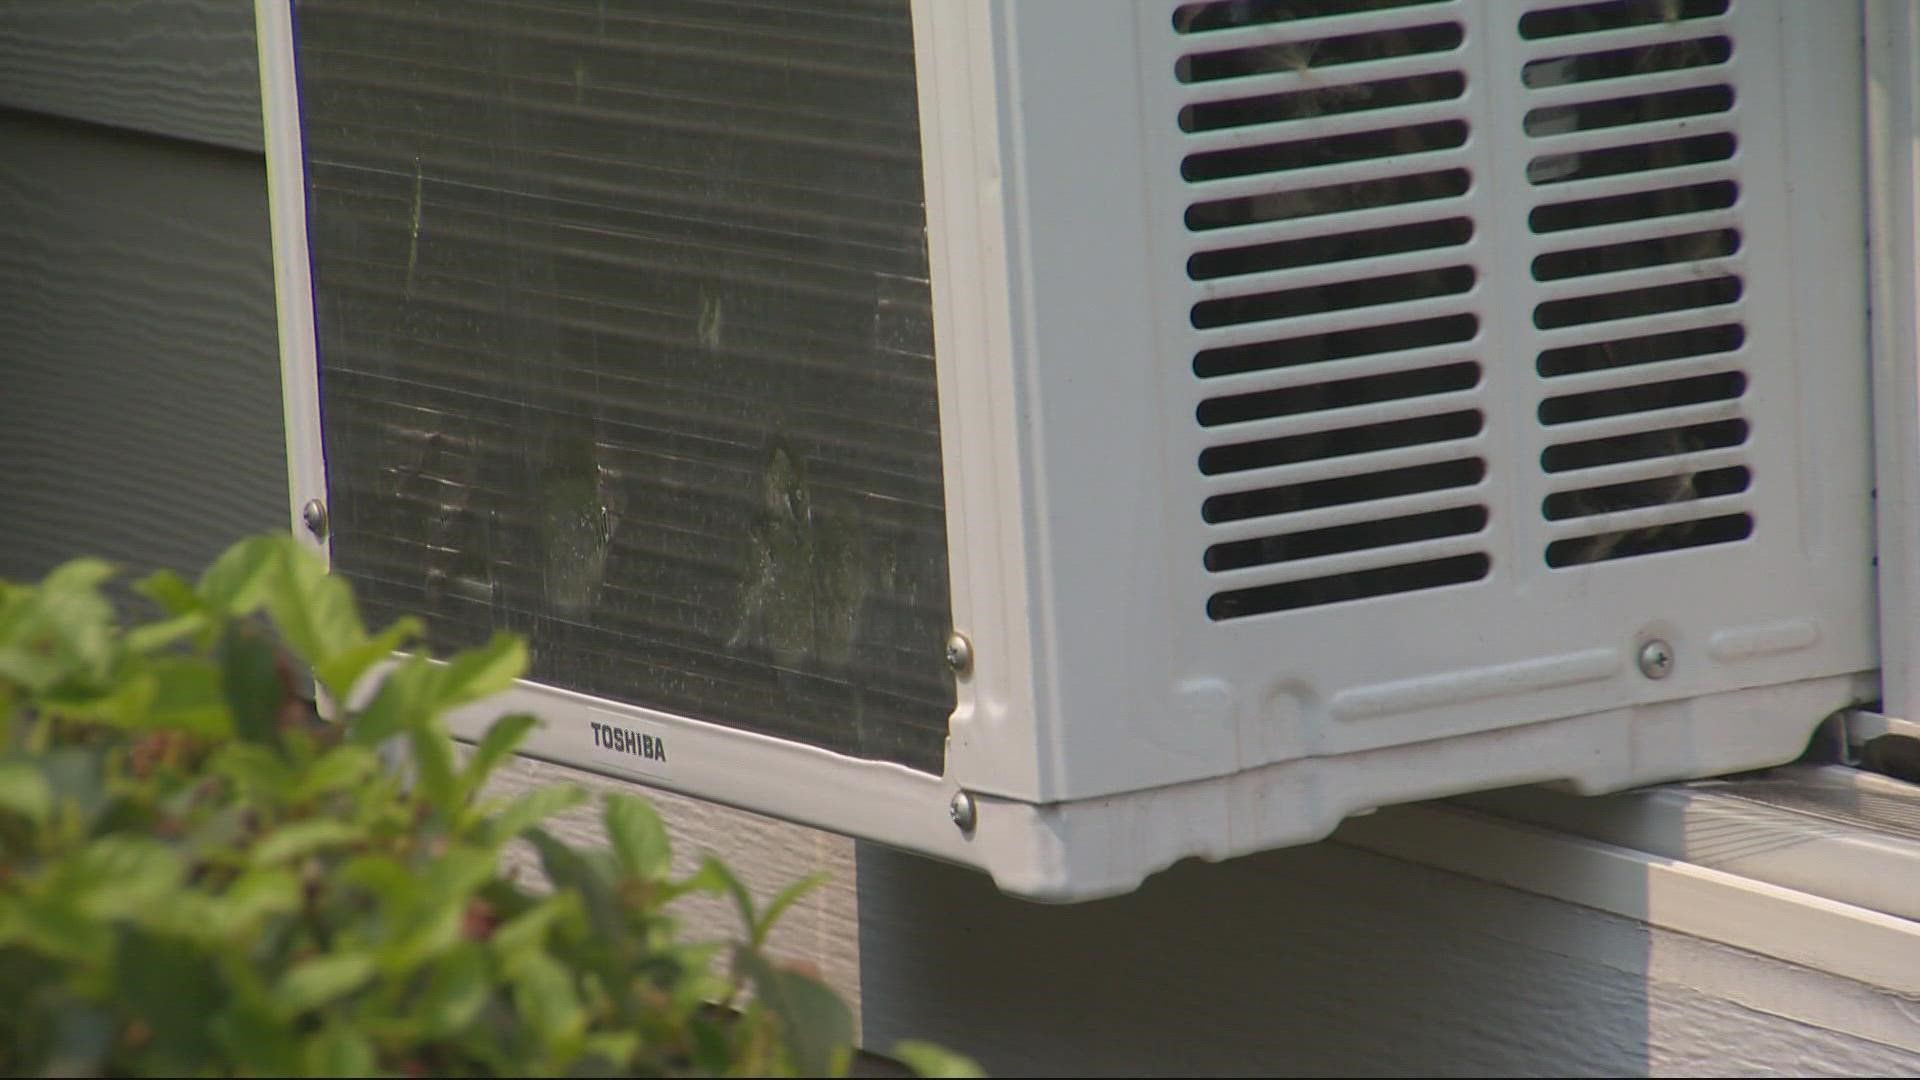 After last year’s deadly heat wave, two bills in the Oregon Legislature aim to address access to air conditioning for renters.